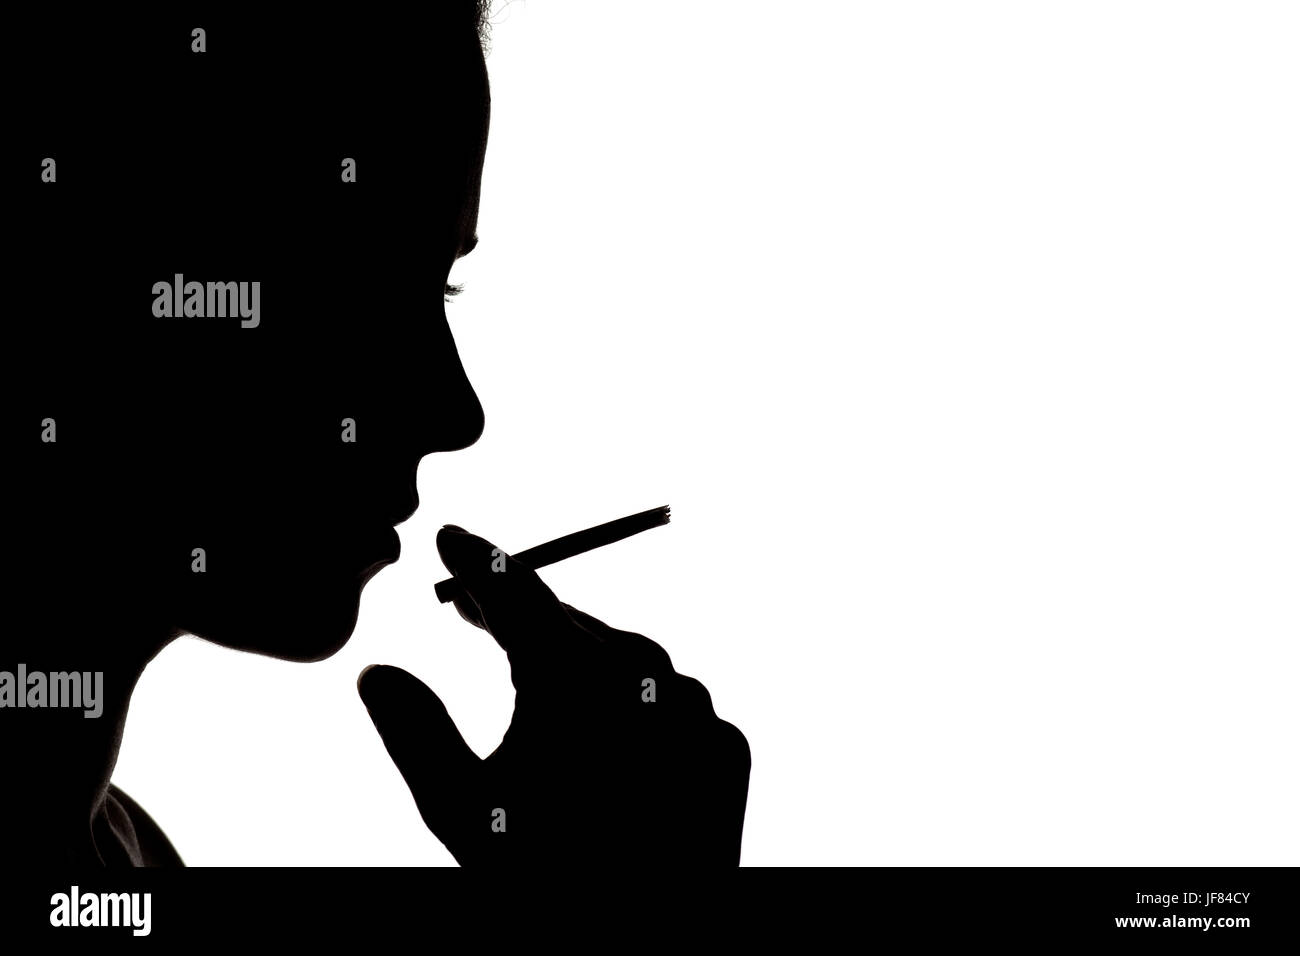 Profile Silhouette of a Woman with Cigarette on White Background Stock Photo